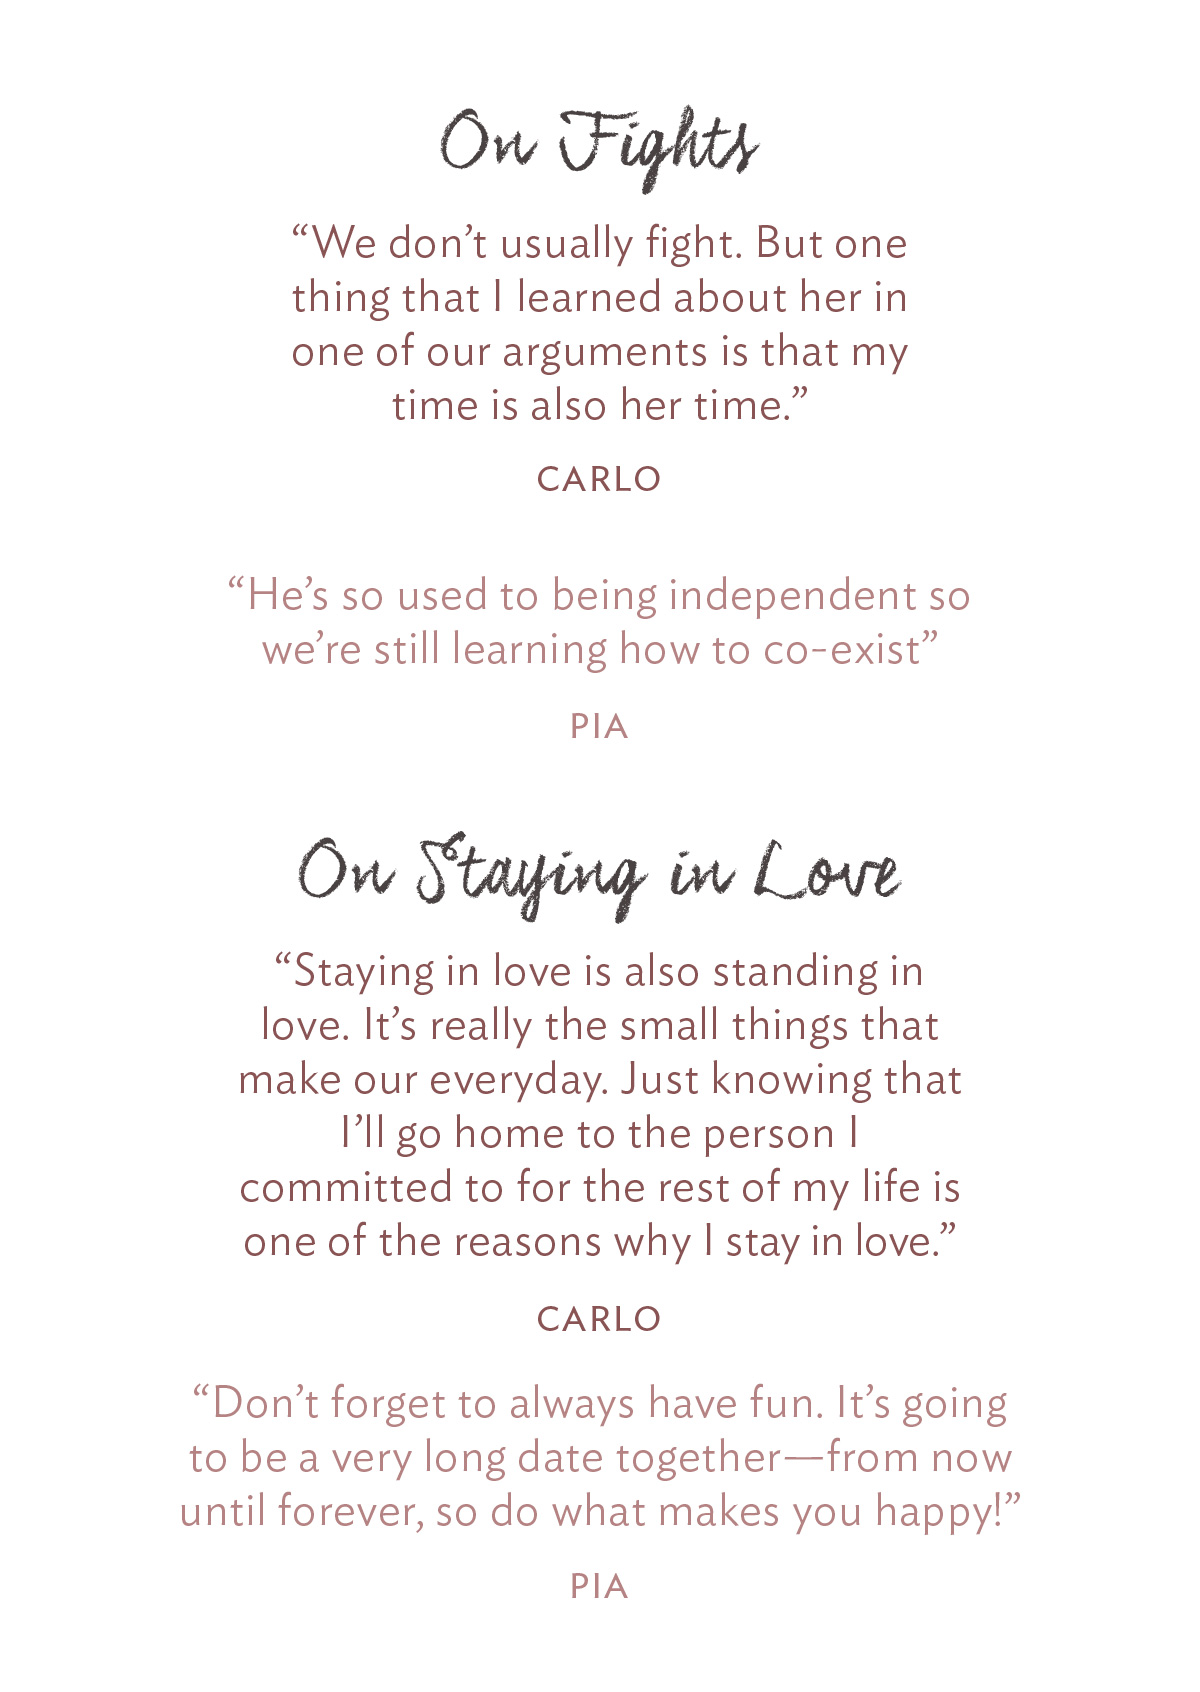 On Fights: “We don’t usually fight. But one thing that I learned about her in one of our arguments is that my time is also her time.” - Carlo “He’s so used to being independent so we’re still learning how to co-exist” - Pia On Staying in Love: “Staying in love is also standing in love. It’s really the small things that make up our everyday. Just knowing that I’ll go home to the person I committed to for the rest of my life is one of the reasons why I stay in love.” - Carlo “Don’t forget to always have fun. It’s going to be a very long date together—from now until forever, so do what makes you happy!” - Pia